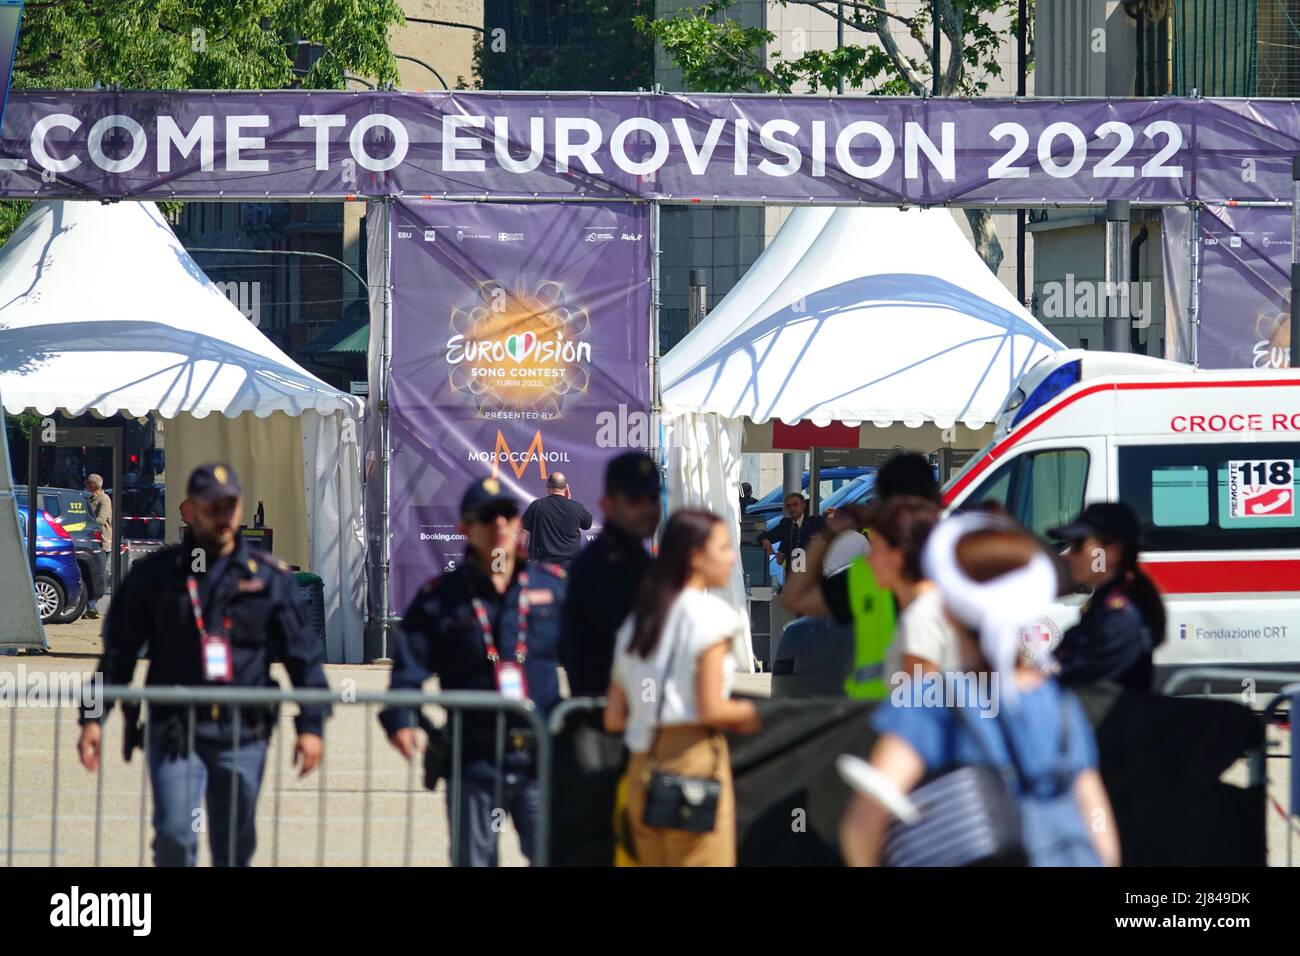 Eurovision Song Contest 2022 logo outside the Arena, venue of the finals.  Turin, Italy - May 2022 Stock Photo